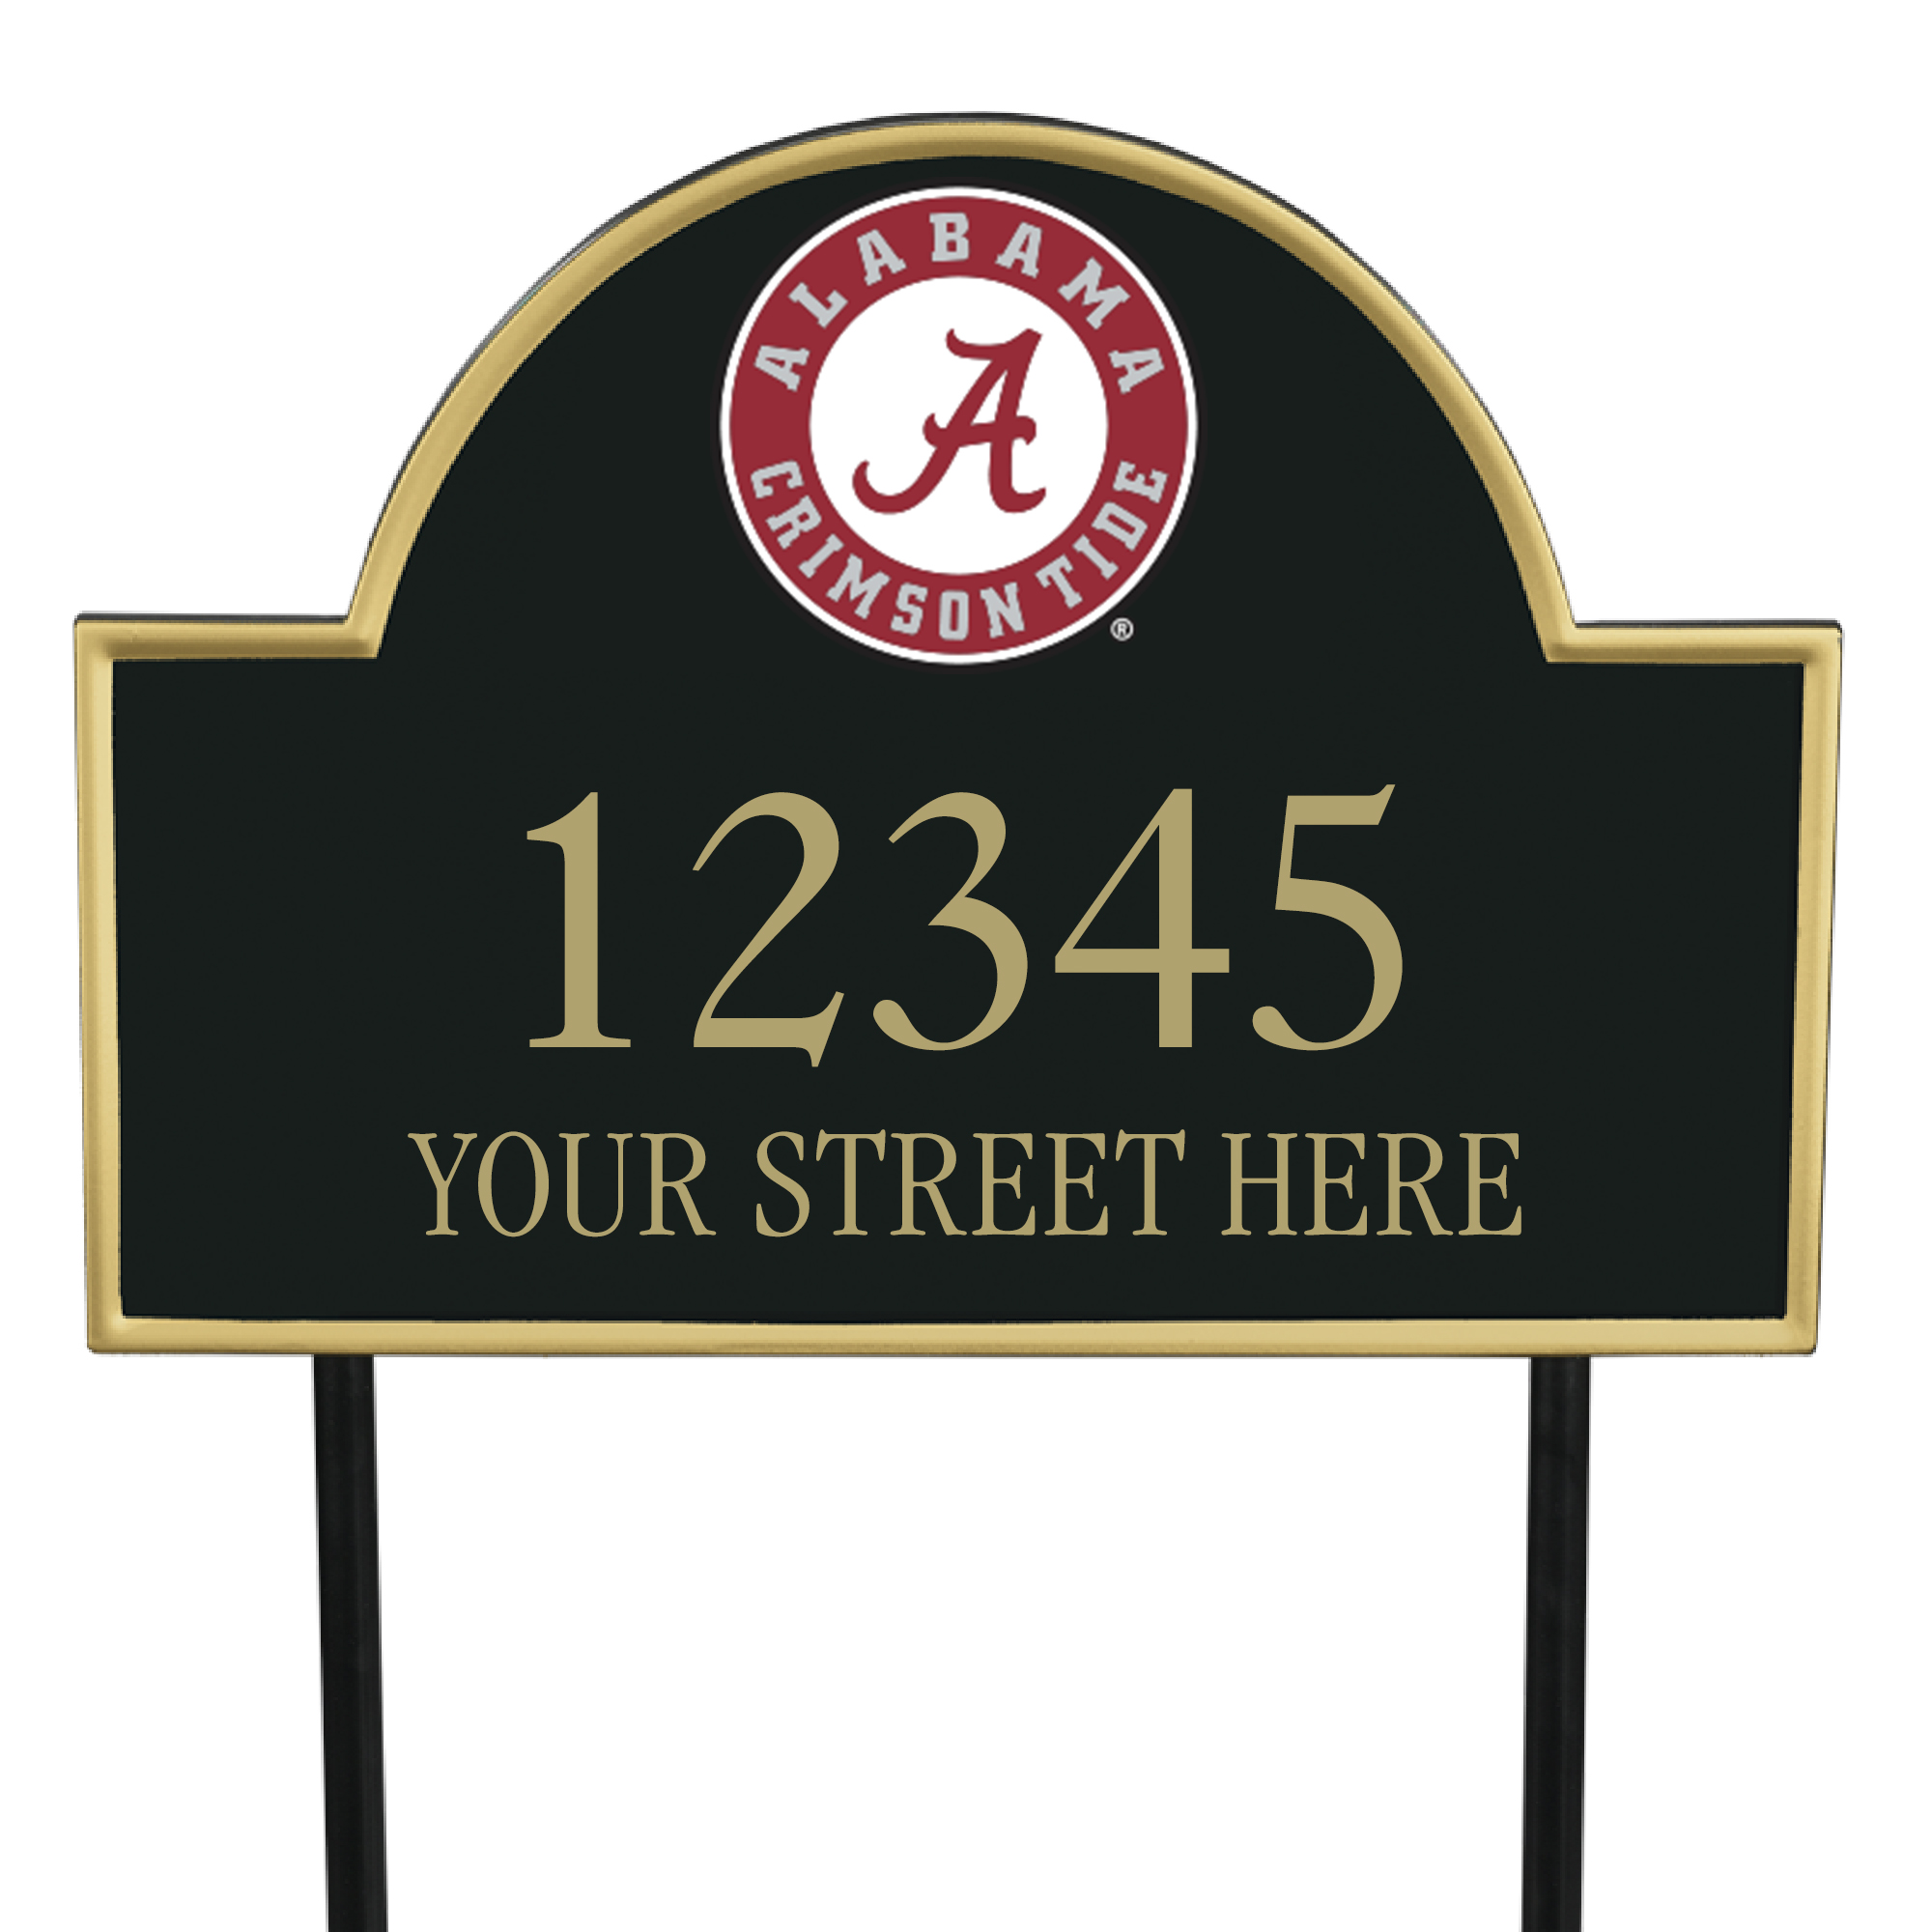 The College Personalized Address Plaque 5716 0384 a main